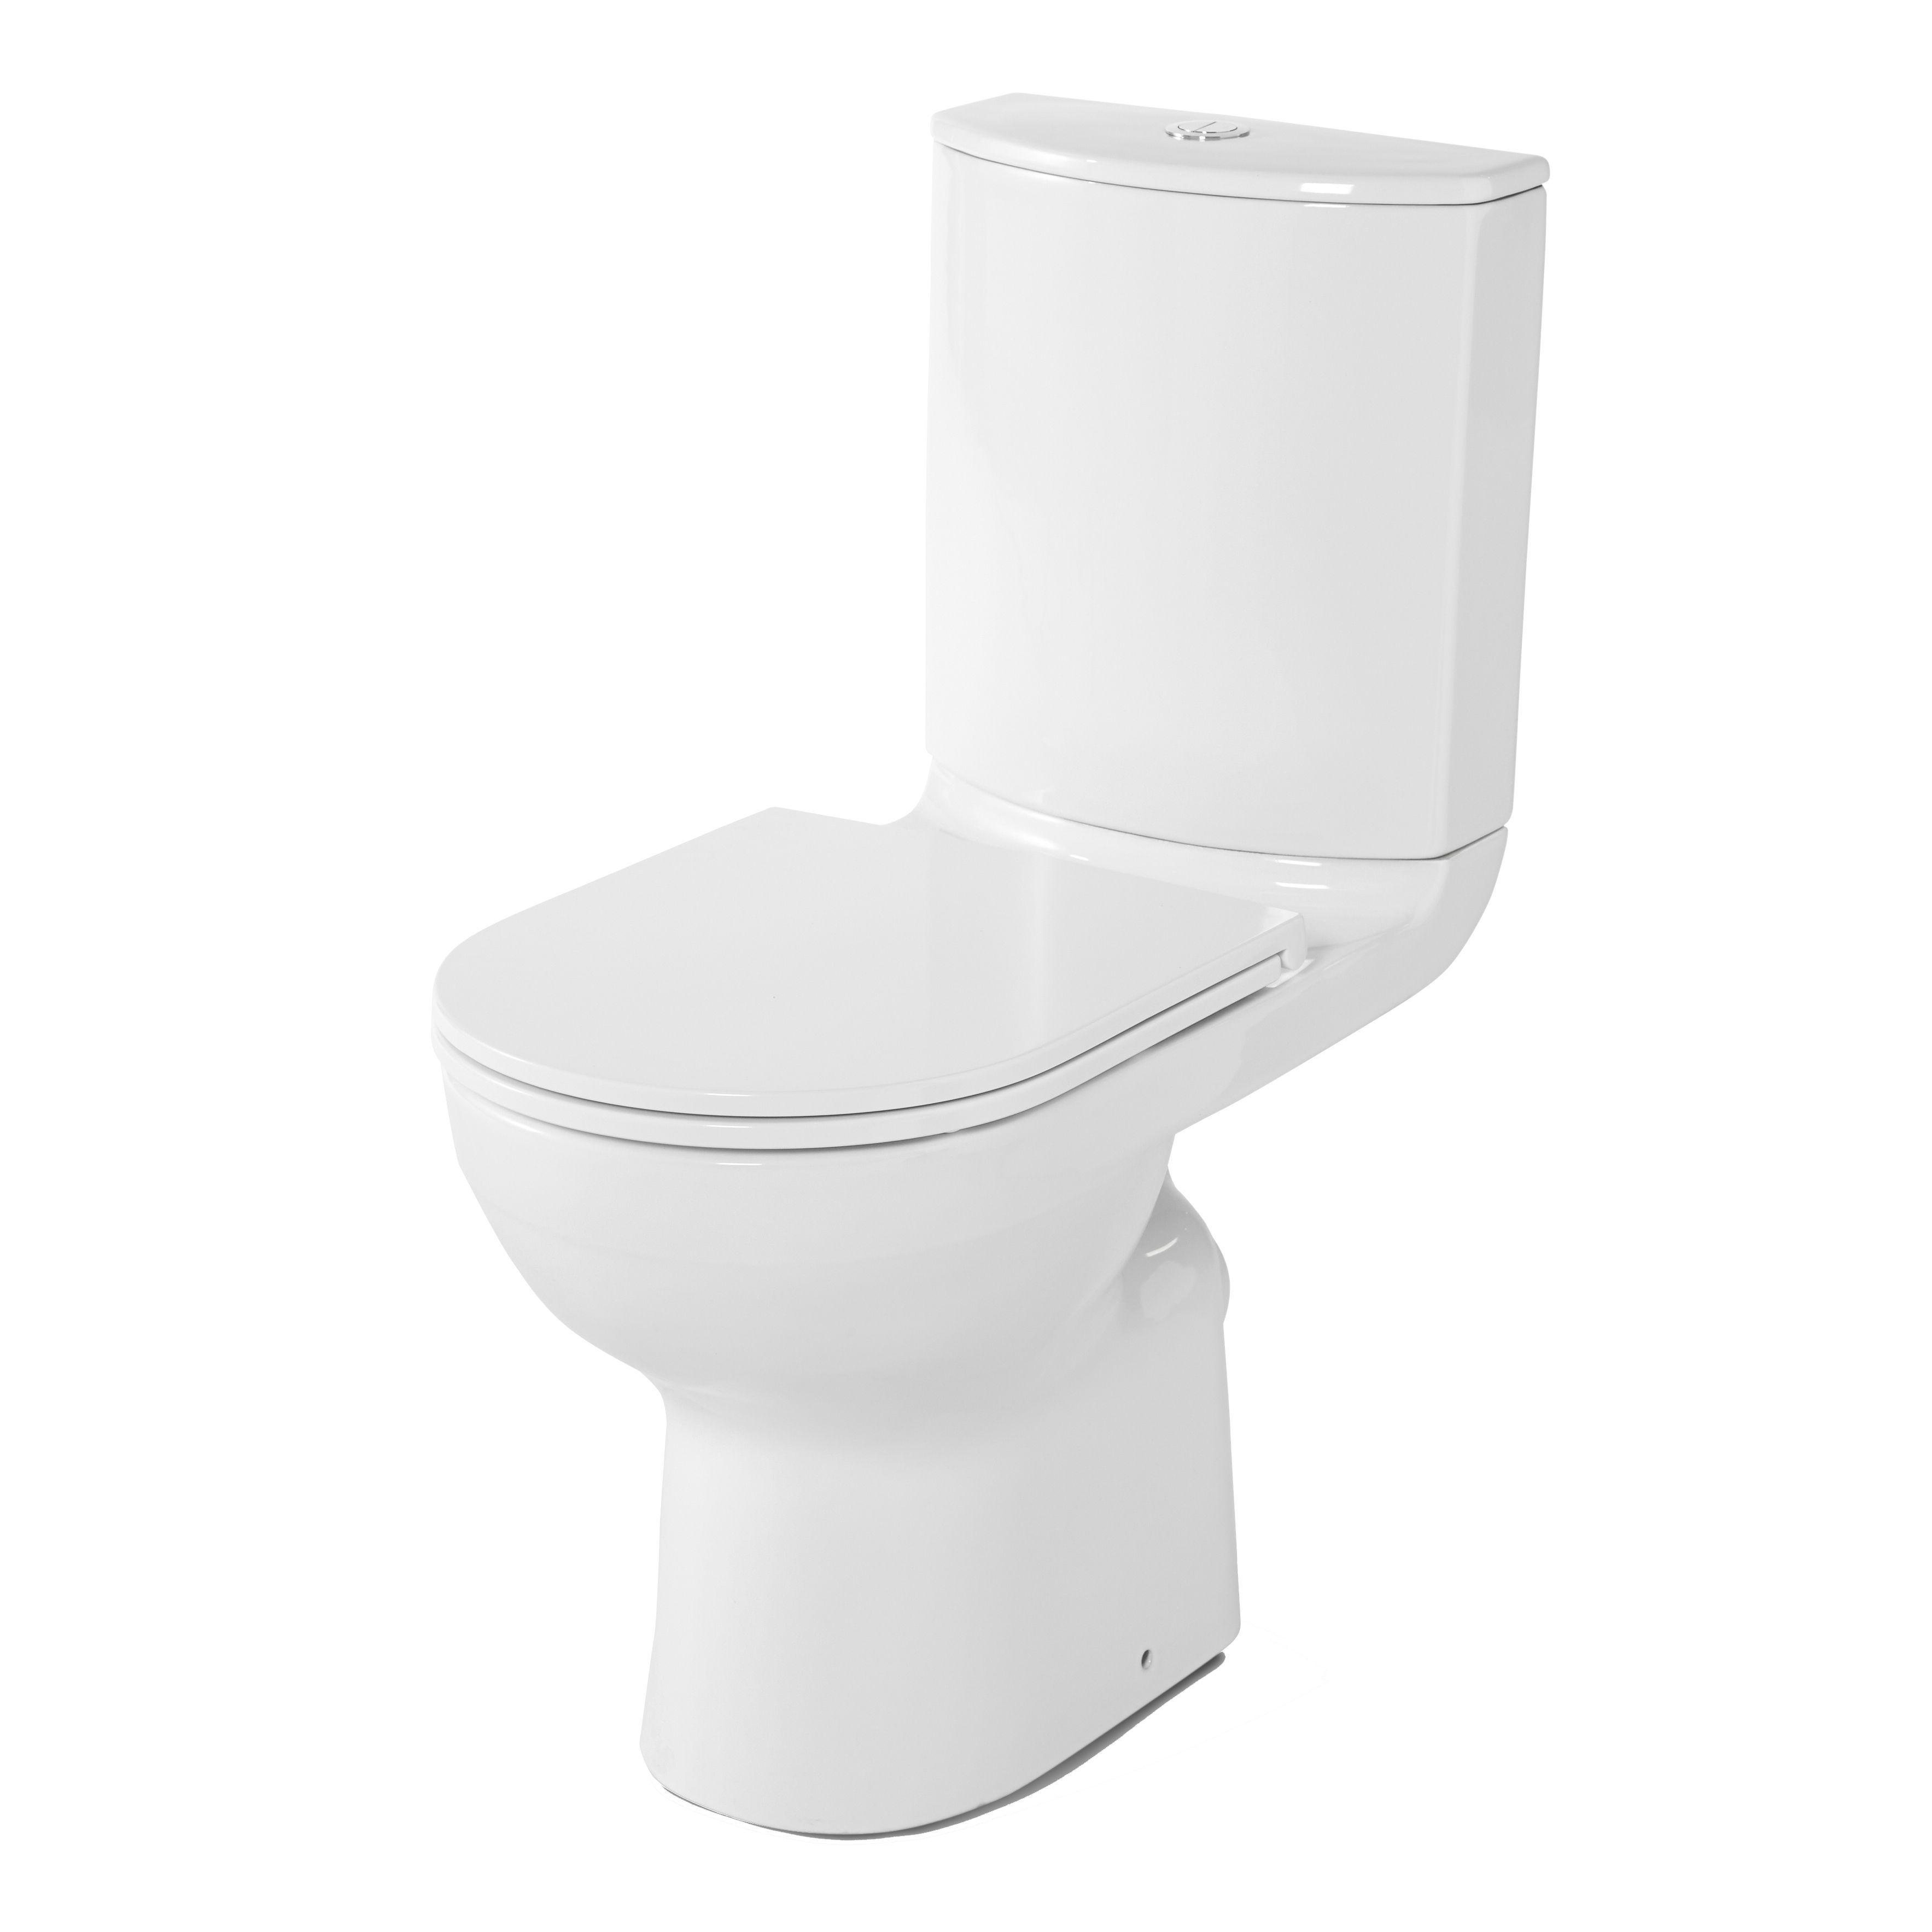 GoodHome Cavally comfort White Close-coupled Floor-mounted Toilet & full pedestal basin